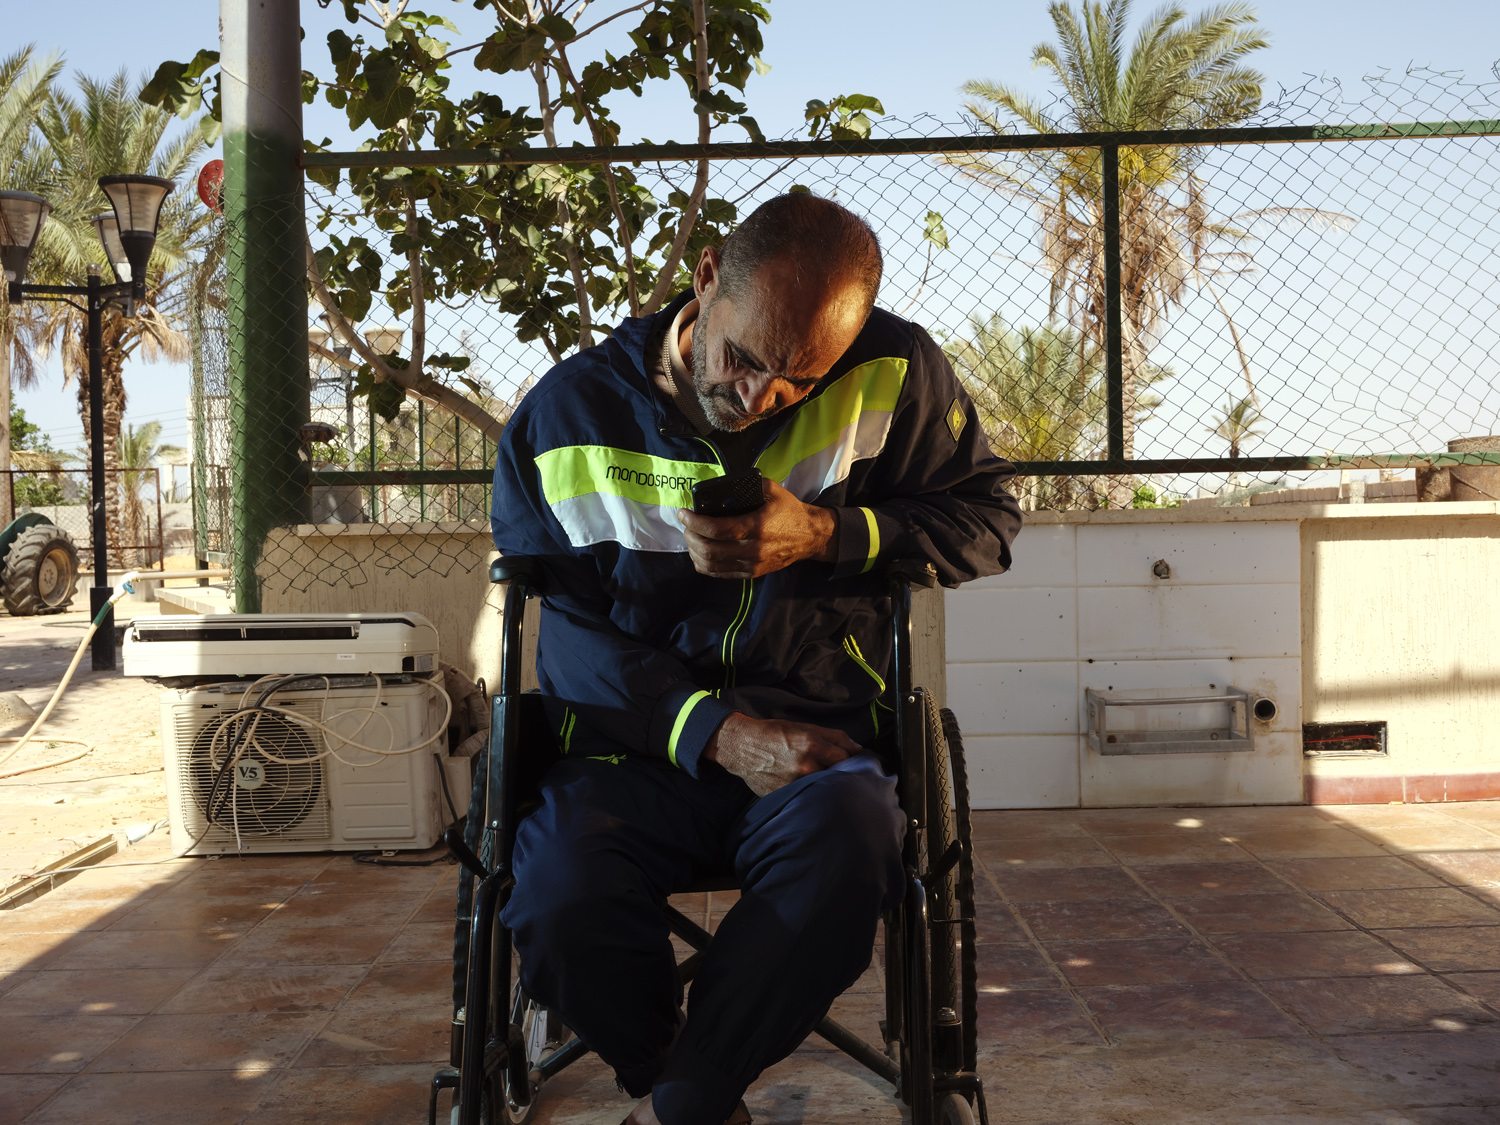 Tripoli, Libya 05/04/2021Ain Zara resident Abdel Moala-Abdel Aziz (48yrs) fled his neighborhood in 2019 as conflict raged around his family home. Upon his return Abdel suffered a stroked and has been in a wheelchair. He says the stroke was brought by the shock related to the 2019 conflict. The Ain Zara district in Tripoli saw the worse of the fighting that raged through Tripoli in 2019. With the humanitarian situation deteriorating most of the residents fled and abadoned both their homes and businesses. Today the former front lines remains much empty and destroyed. Jehad Nga